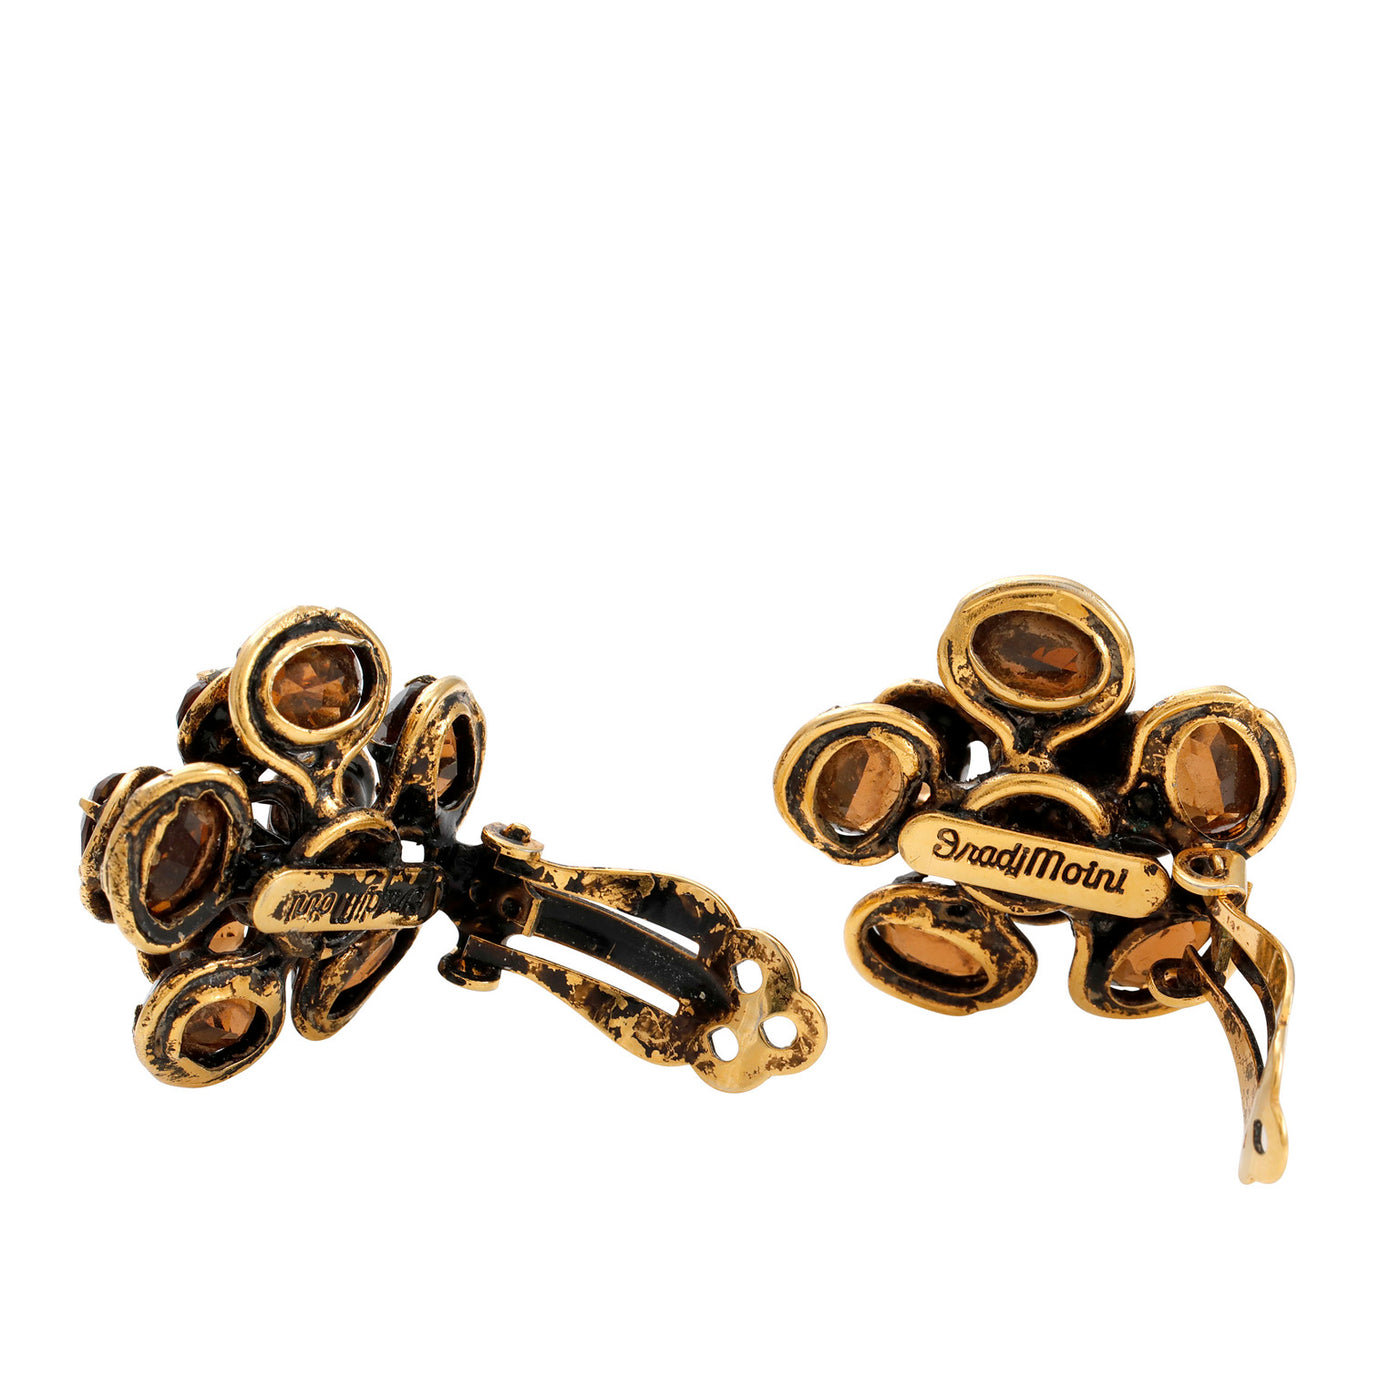 Chanel Vintage Amber Crystal Camellia Earrings with Gold Hardware